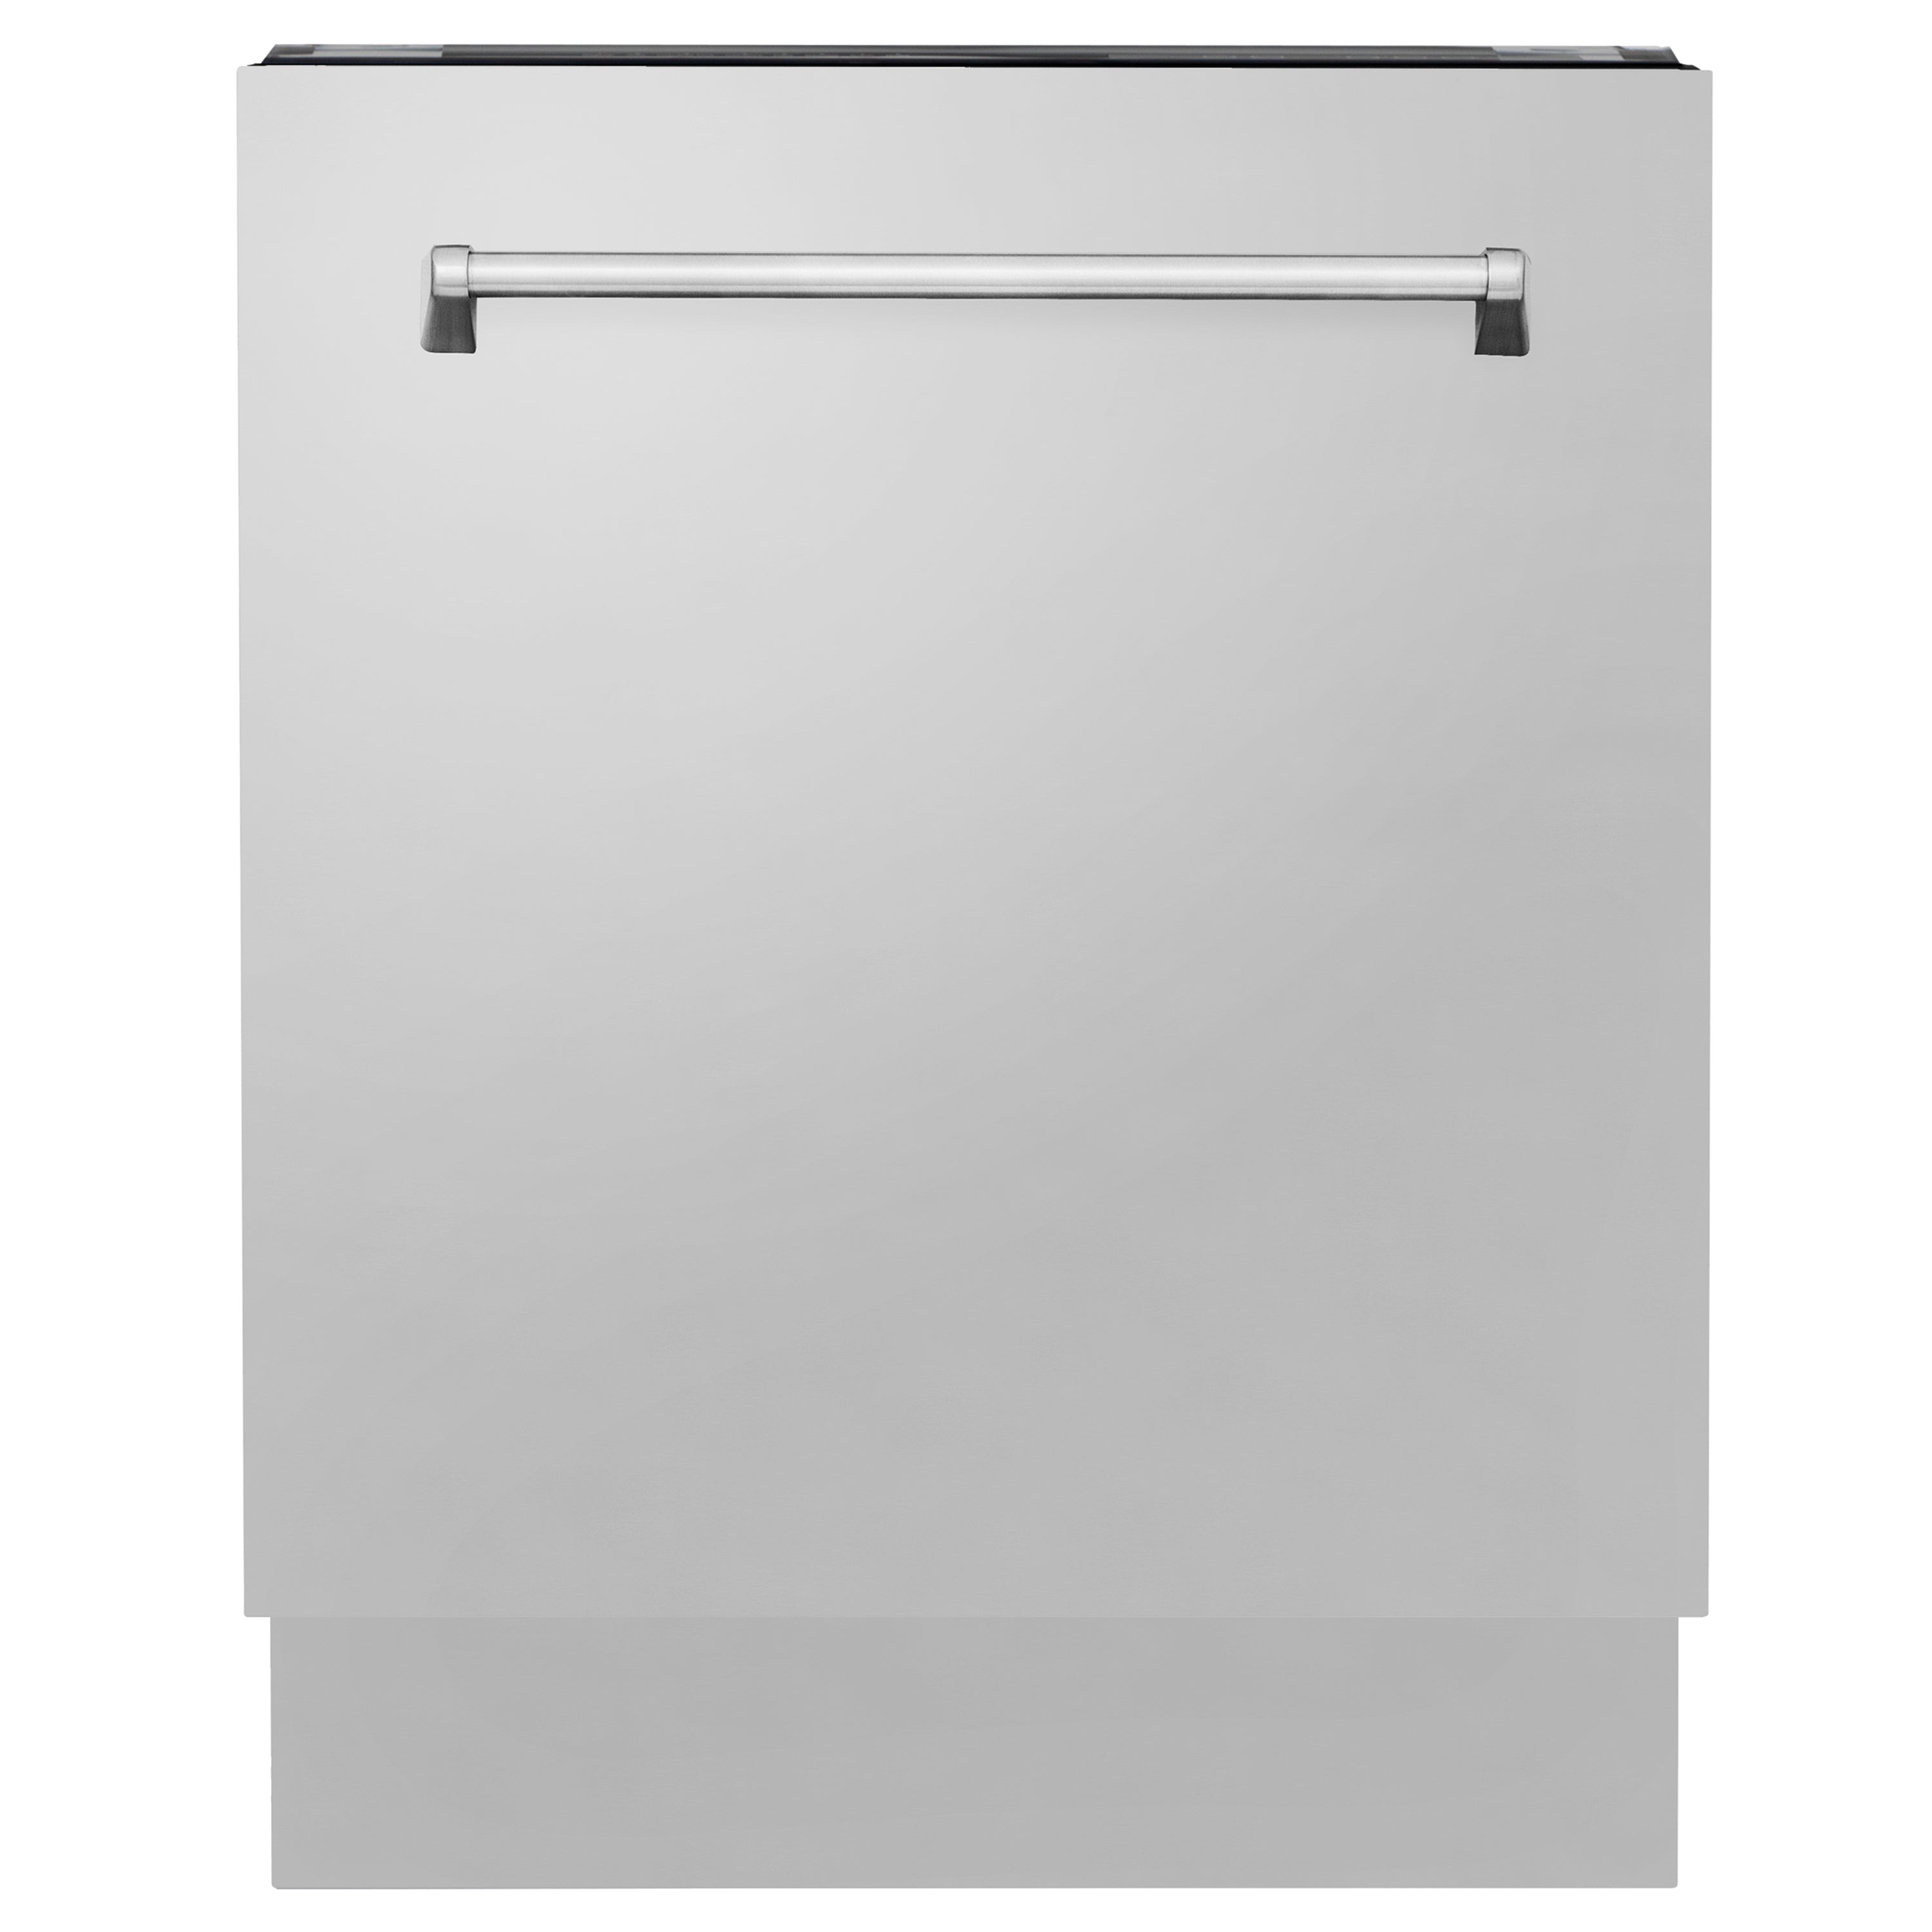 ZLINE Kitchen Package in Stainless Steel with 36 in. French Door Refrigerator, 36 in. Dual Fuel Range, 36 in. Convertible Vent Range Hood, 24 in. Microwave Drawer, and 24 in. Tall Tub Dishwasher (5KPR-RARH36-MWDWV)